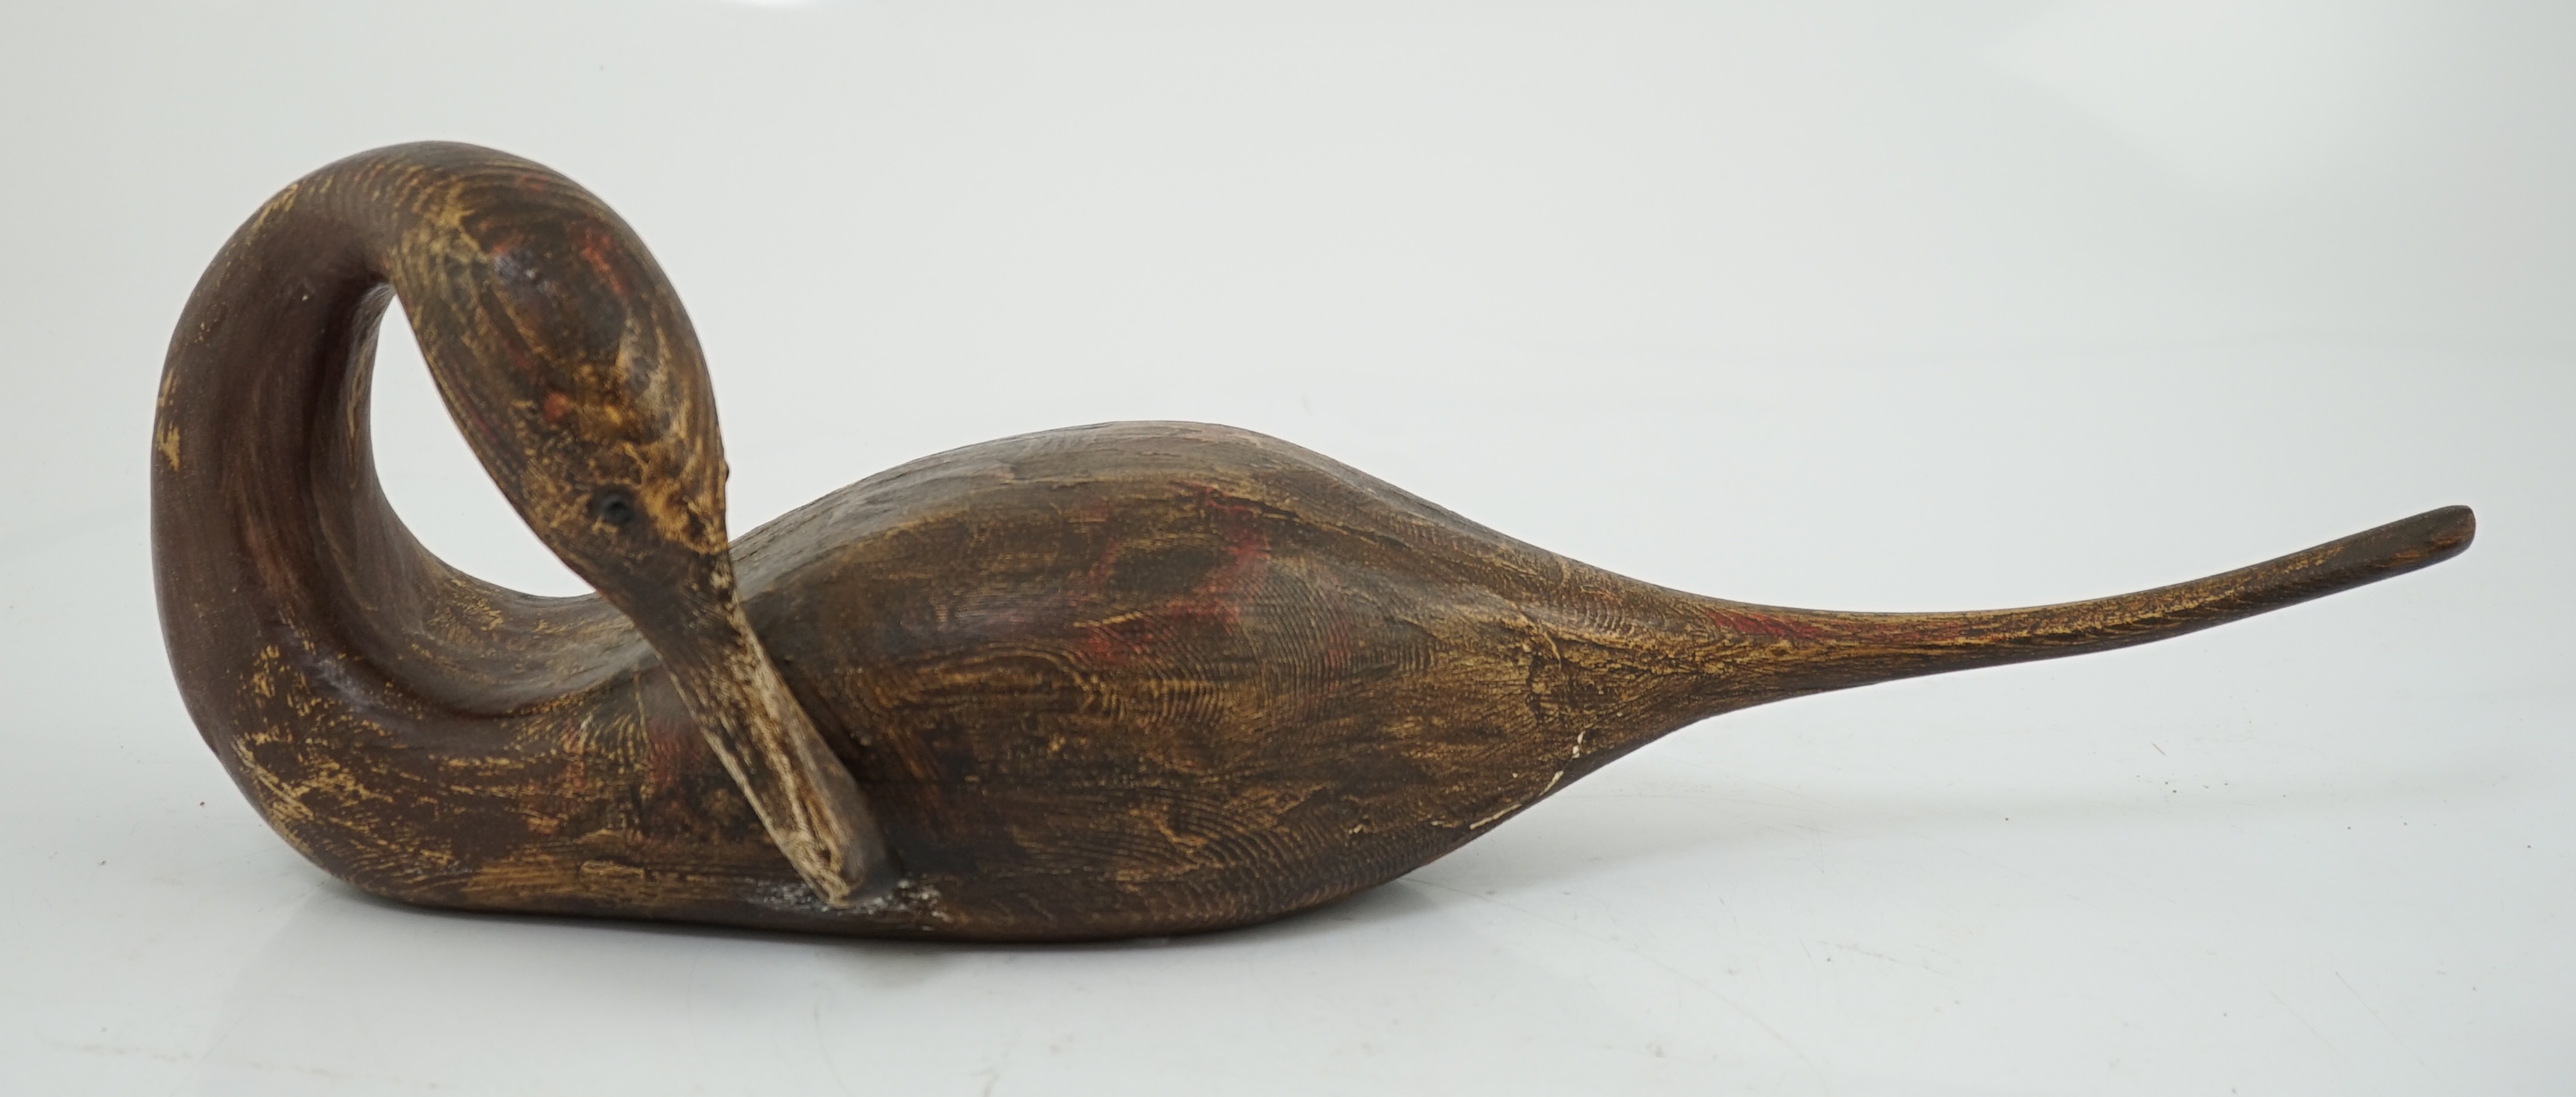 Guy Taplin (British, b.1939), a carved and painted wood figure of a pintail duck